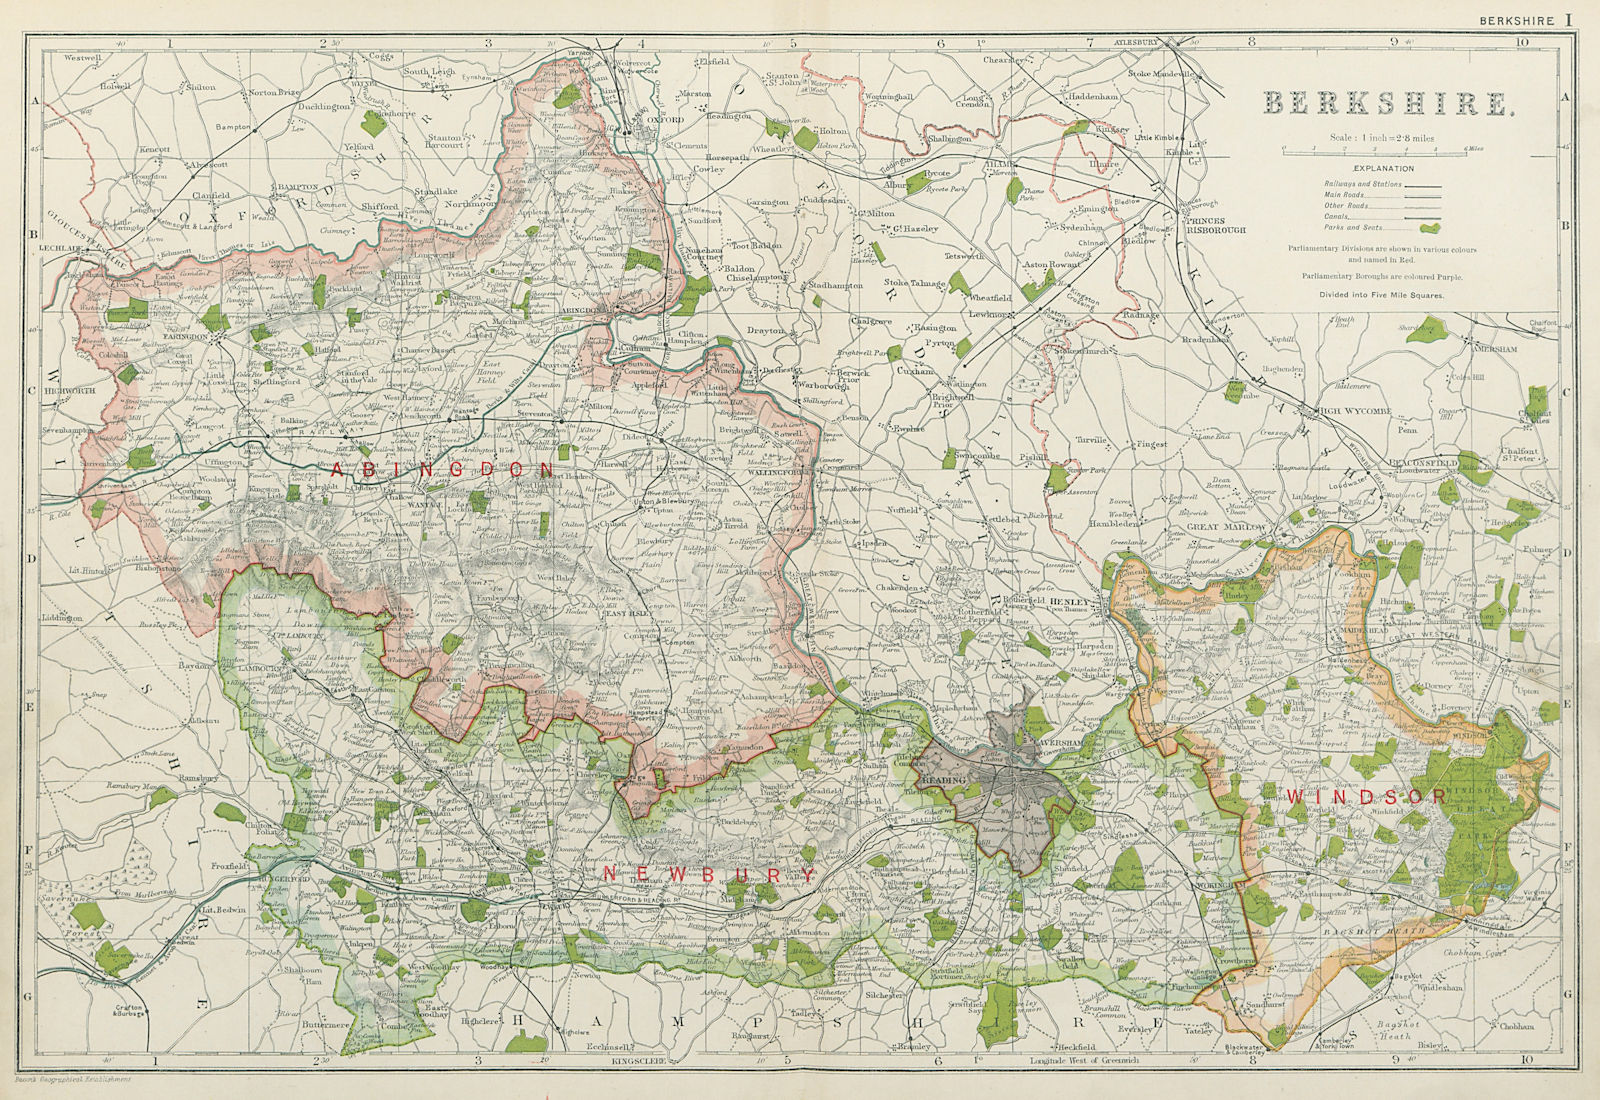 Associate Product BERKSHIRE. Showing Parliamentary divisions, boroughs & parks. BACON 1920 map